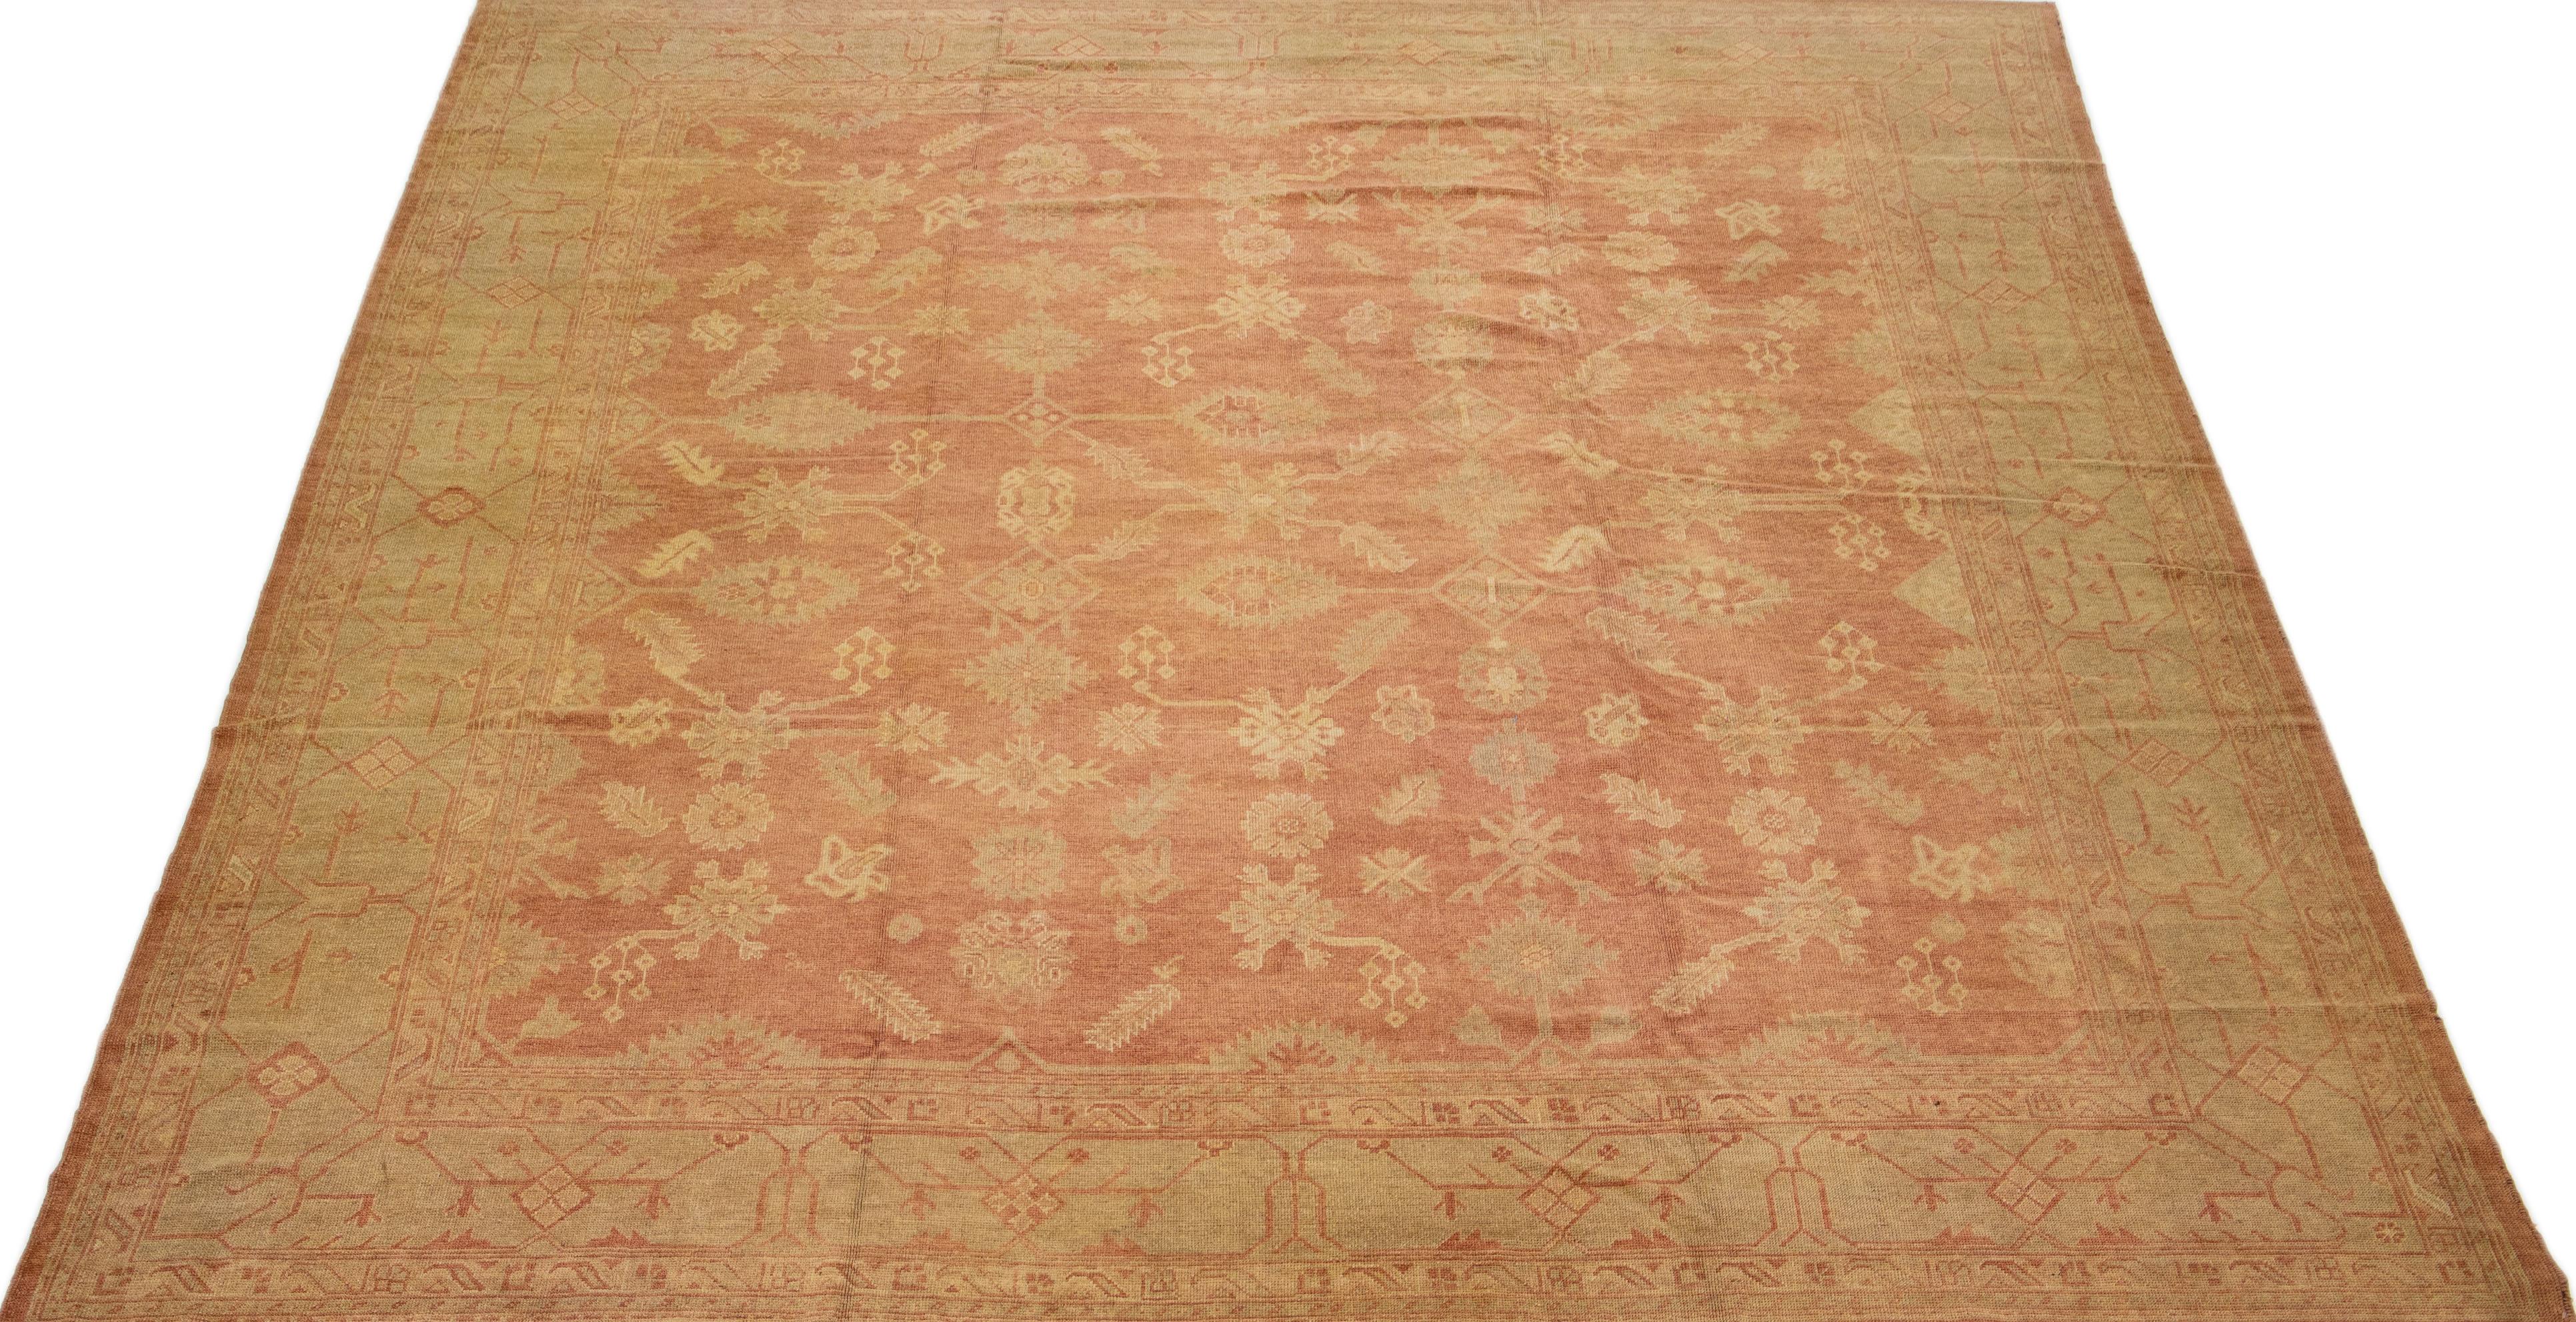 Beautiful modern Turkish Oushak hand-knotted wool rug with a light rust-orange color field. This rug has gray accents in a gorgeous large-scale floral motif.

This rug measures: 13'10